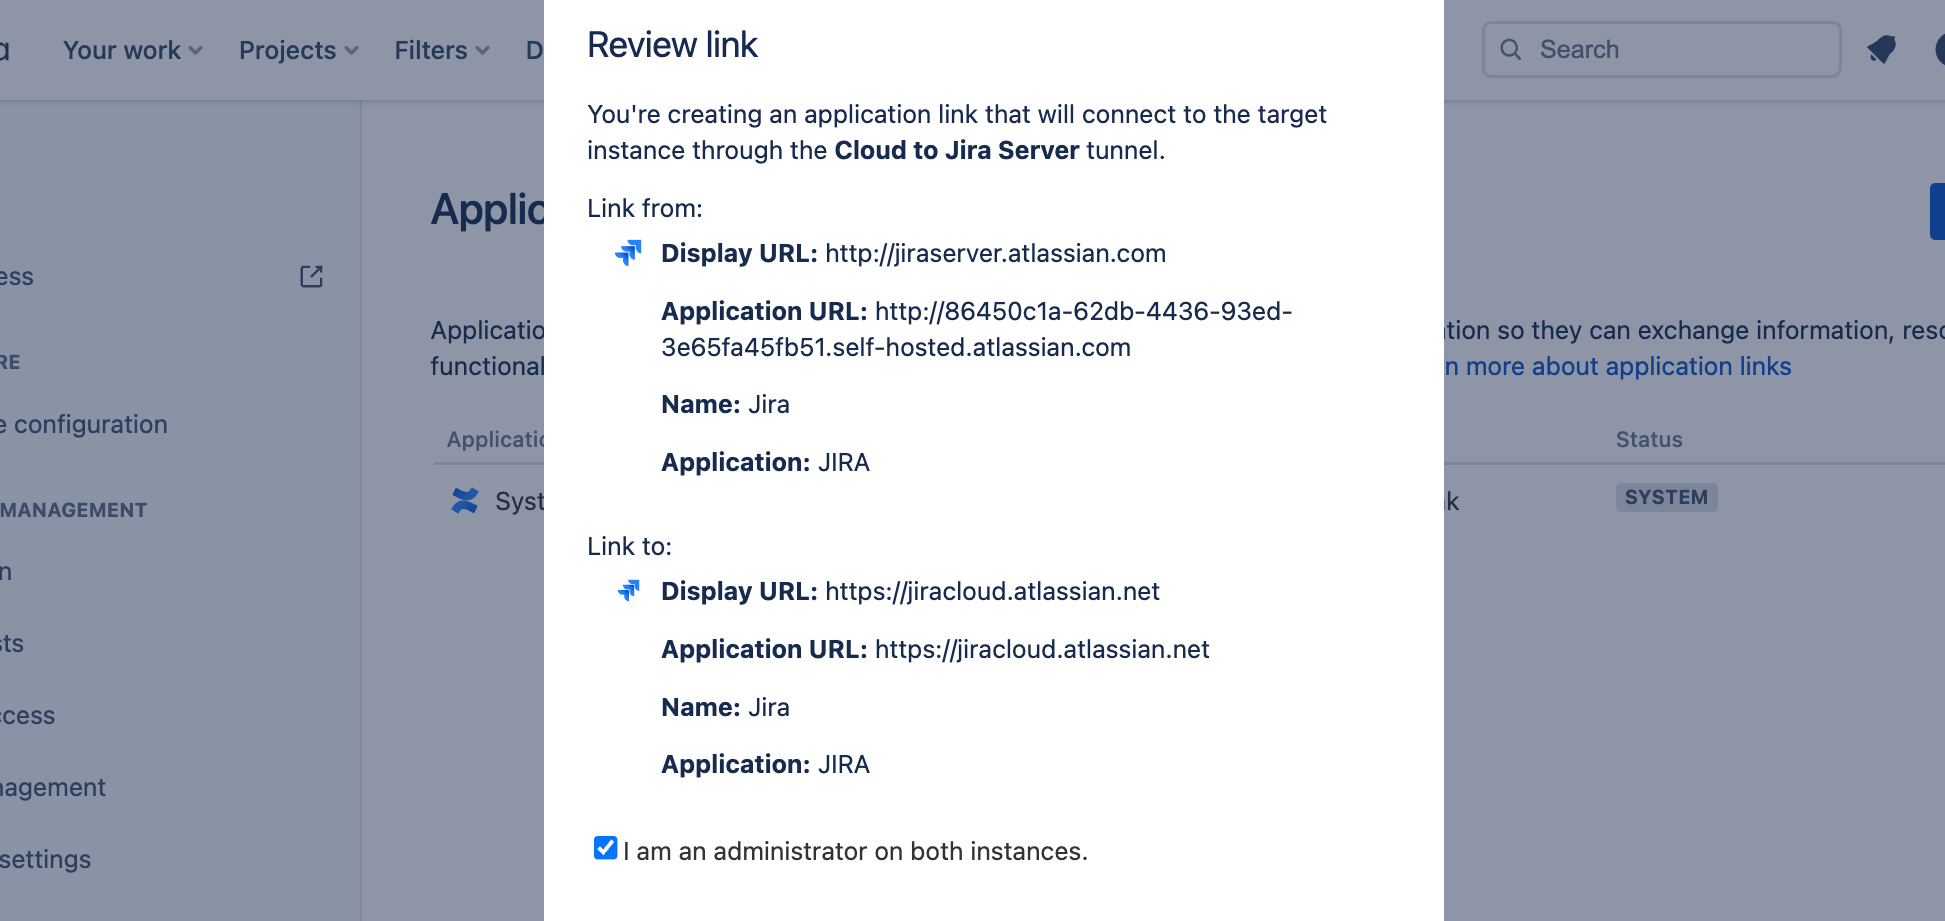 Review links screen that shows the details of the self-managed and cloud instances.